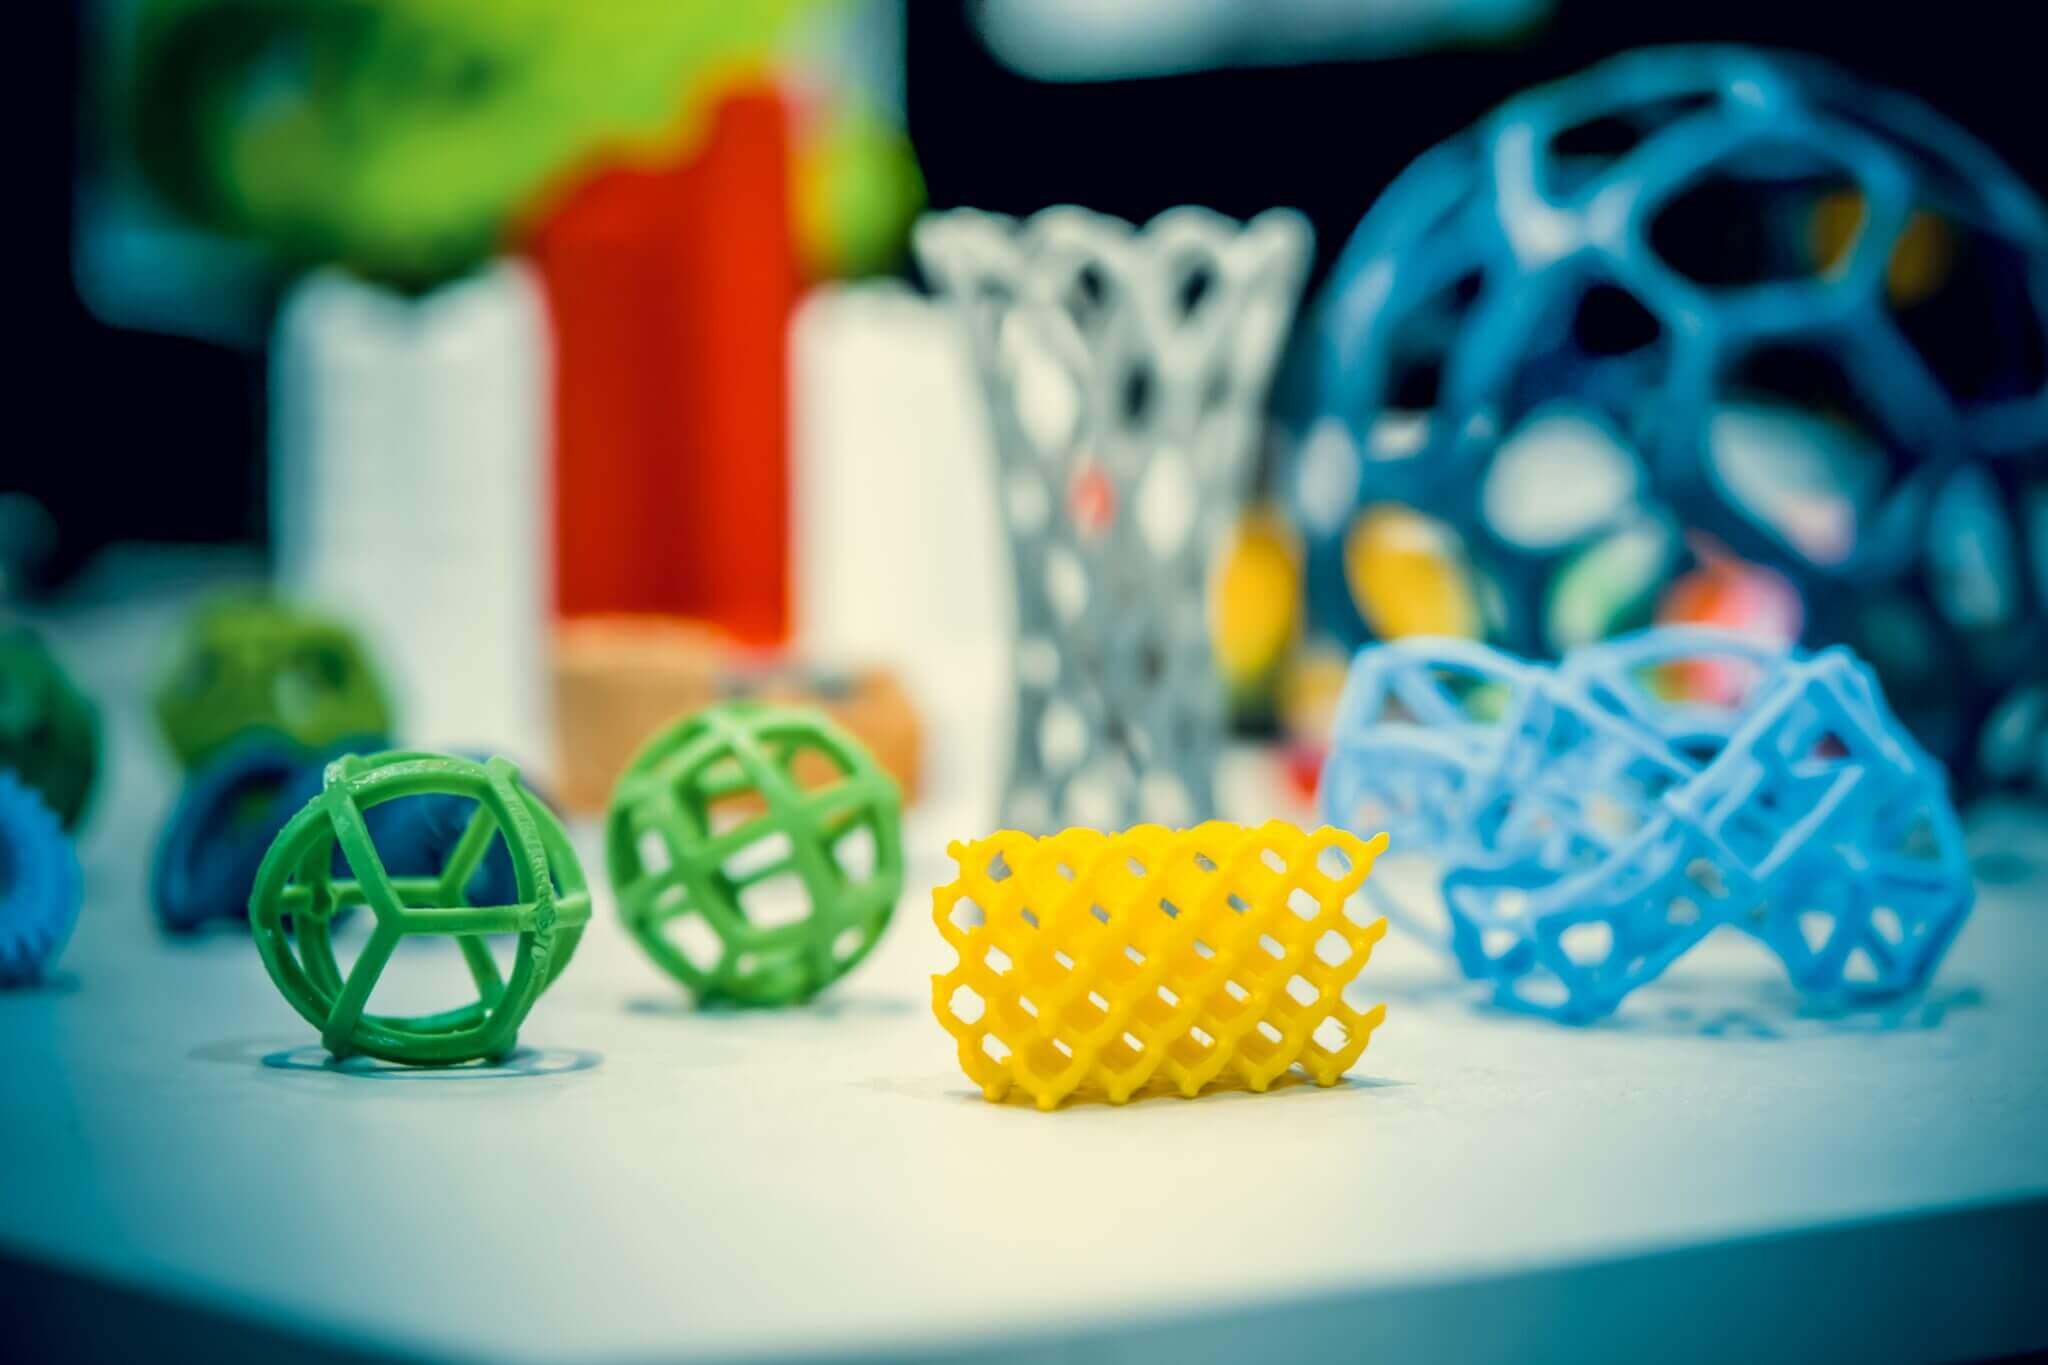 3D printed shapes